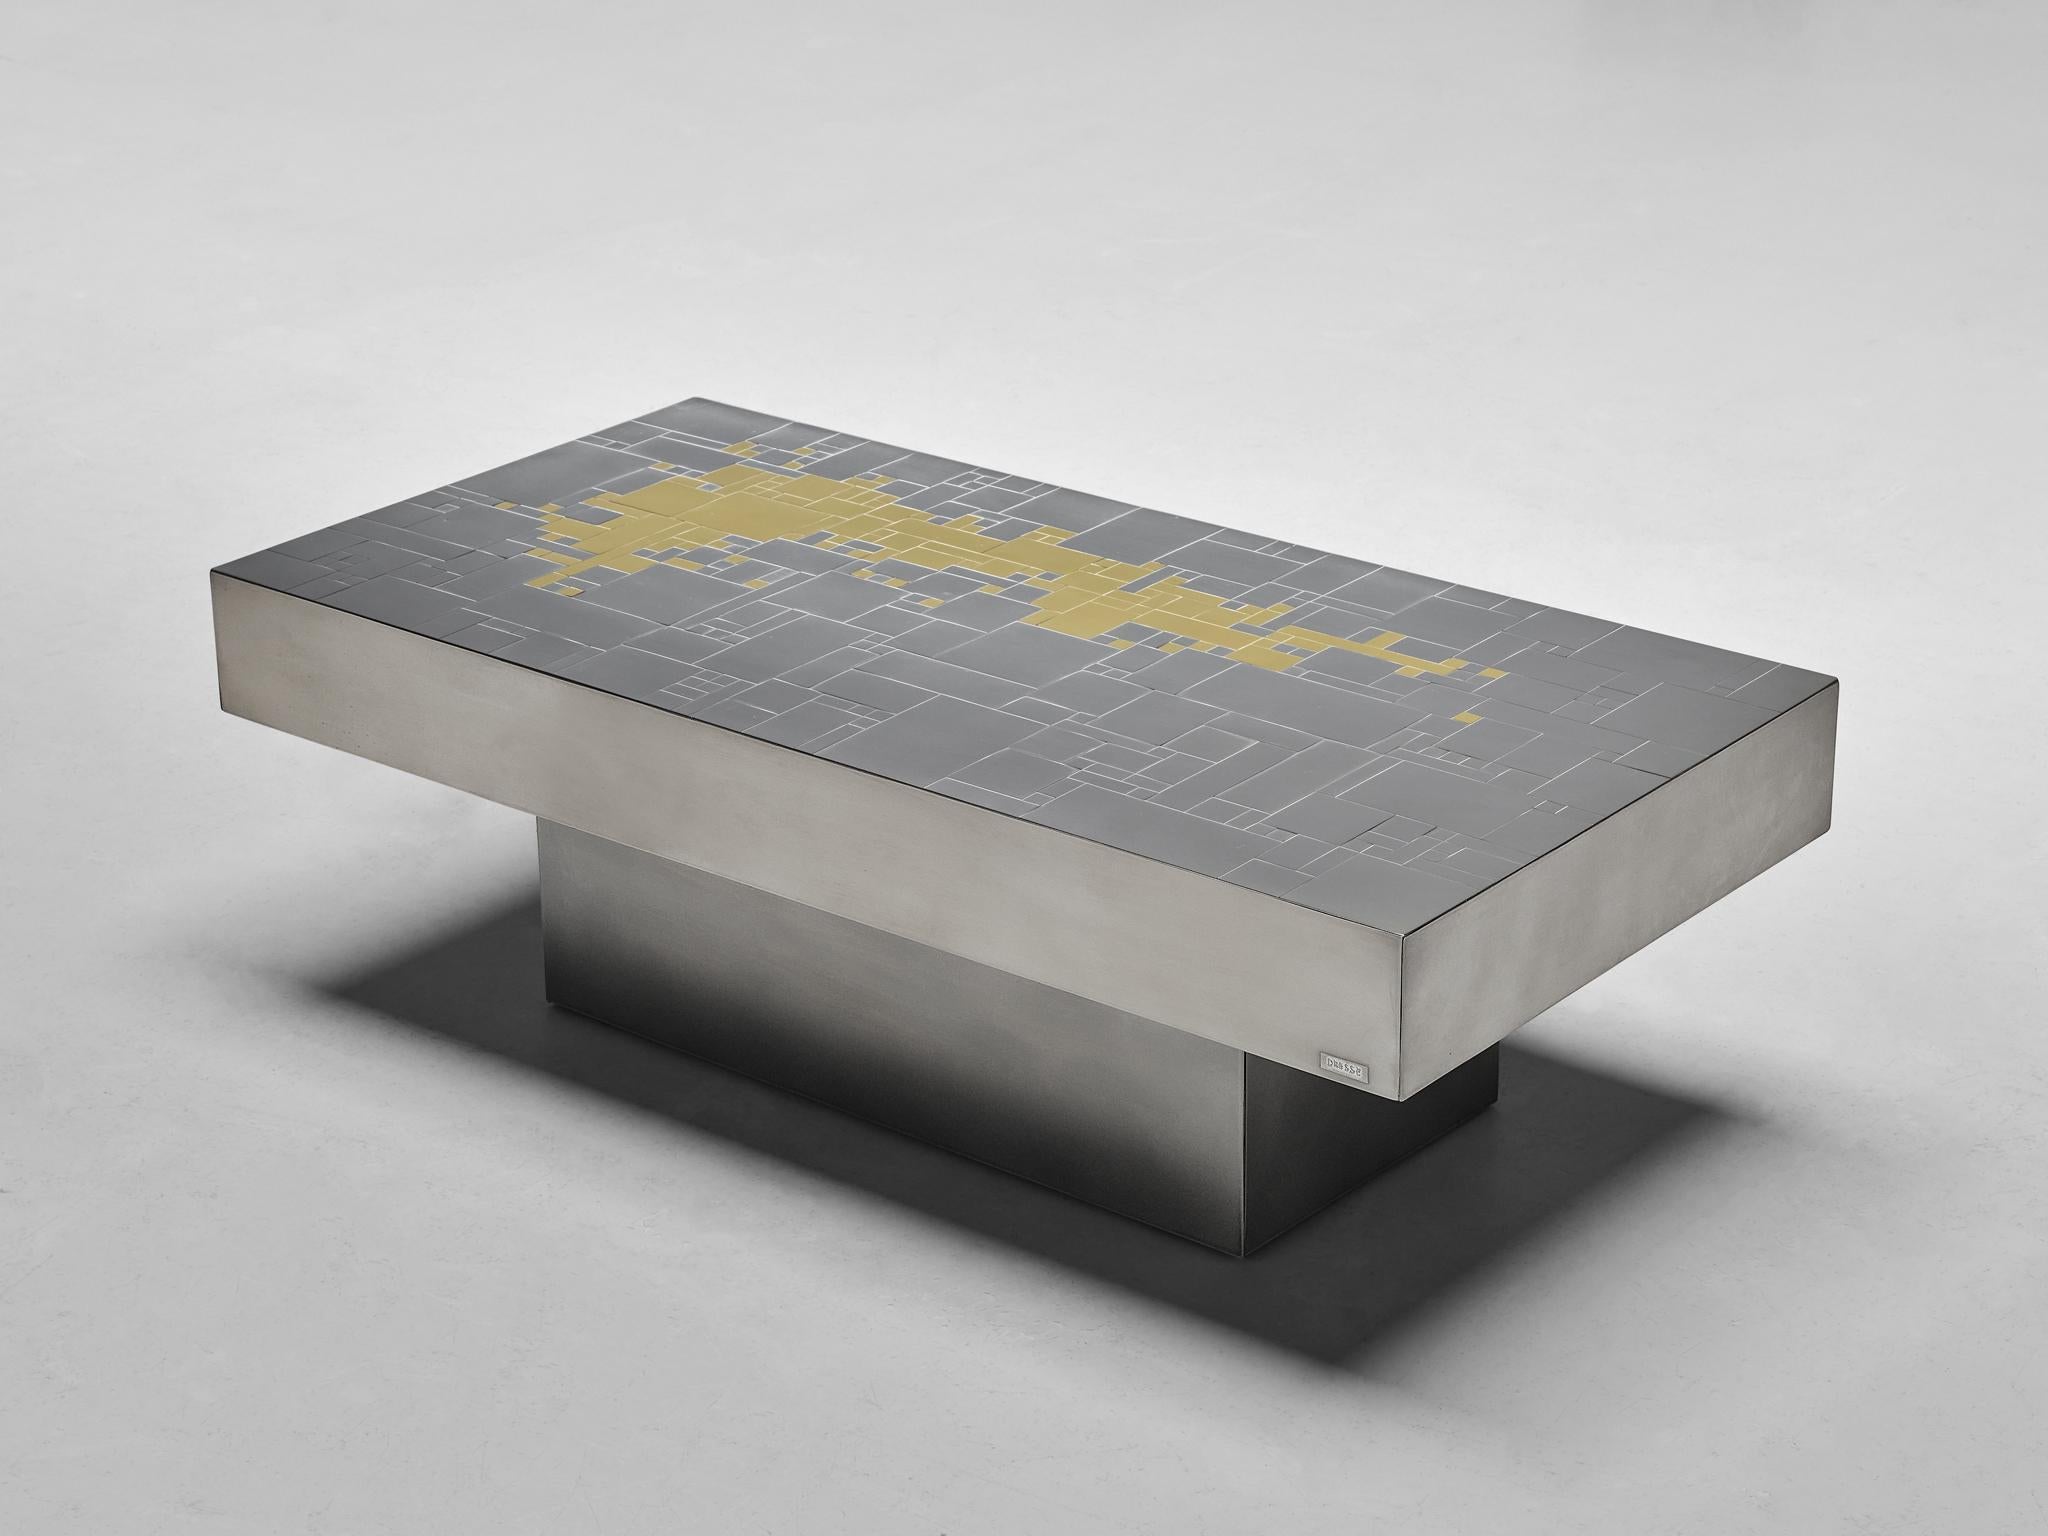 Jean Claude Dresse, coffee table, brass, brushed steel, Belgium, 1970s

Rectangular coffee table with striking tabletop designed by Jean Clause Dresse in the 1970s. Dresse is known for his bold designs, this table is no exception. The surface is